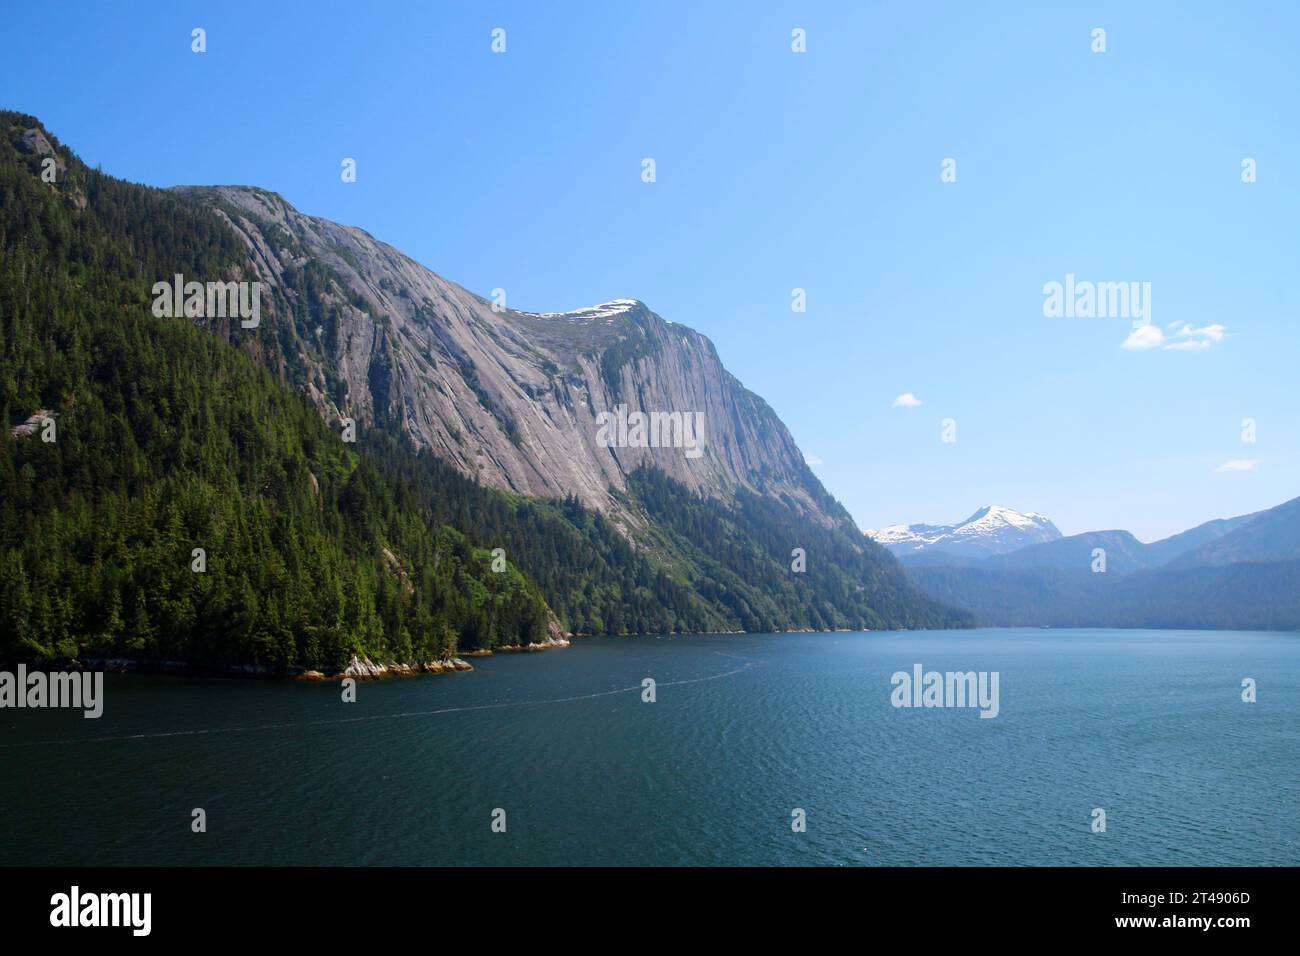 Alaska, Misty Fiords National Monument - Tongass National Forest Foto Stock